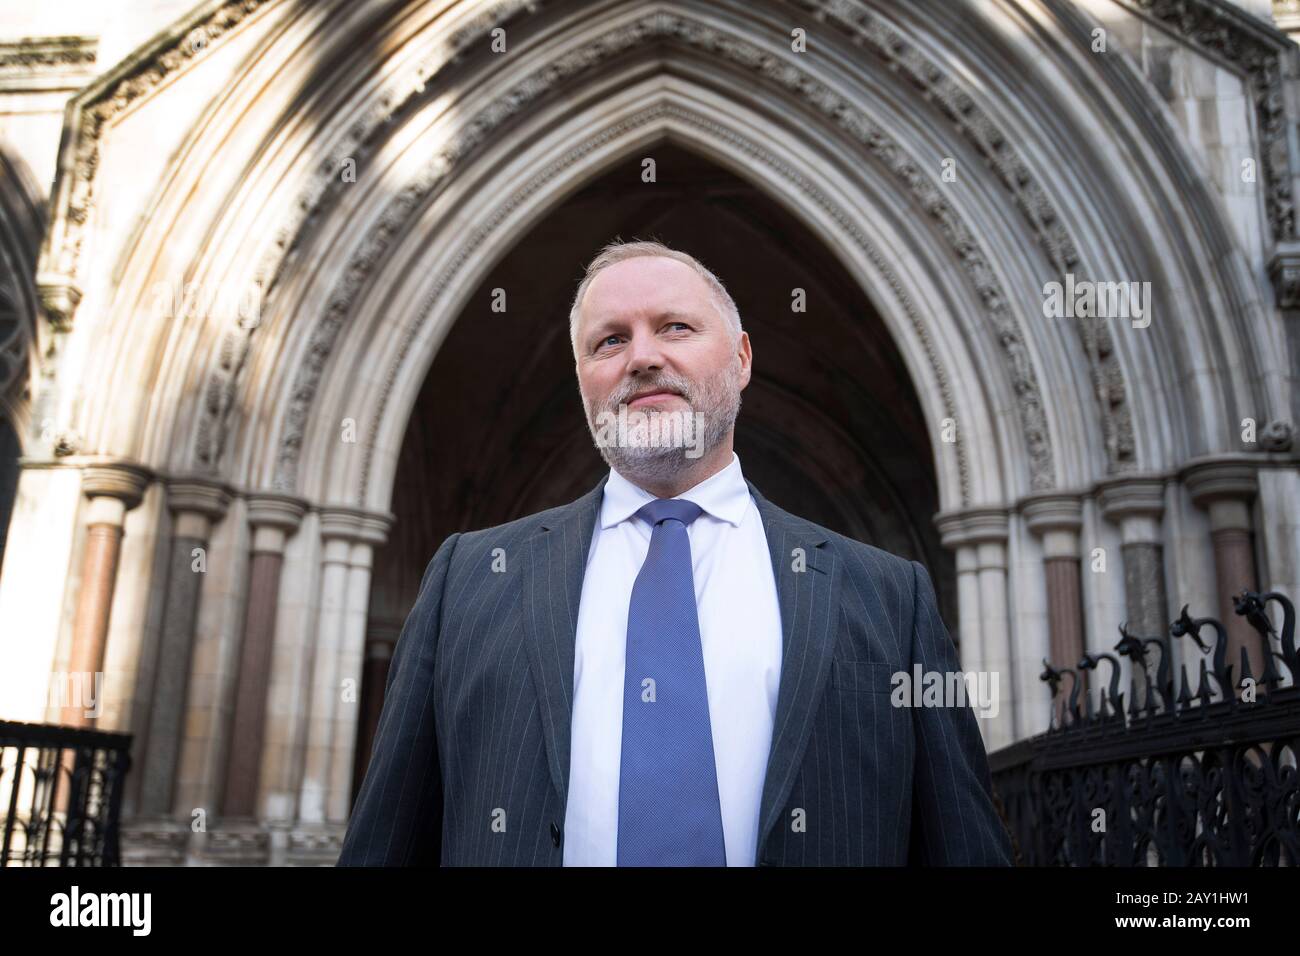 Former police officer Harry Miller outside the High Court, London, ahead of the ruling that his allegedly 'transphobic' tweets were lawful and Humberside Police's response interfered with his right to freedom of expression. Stock Photo